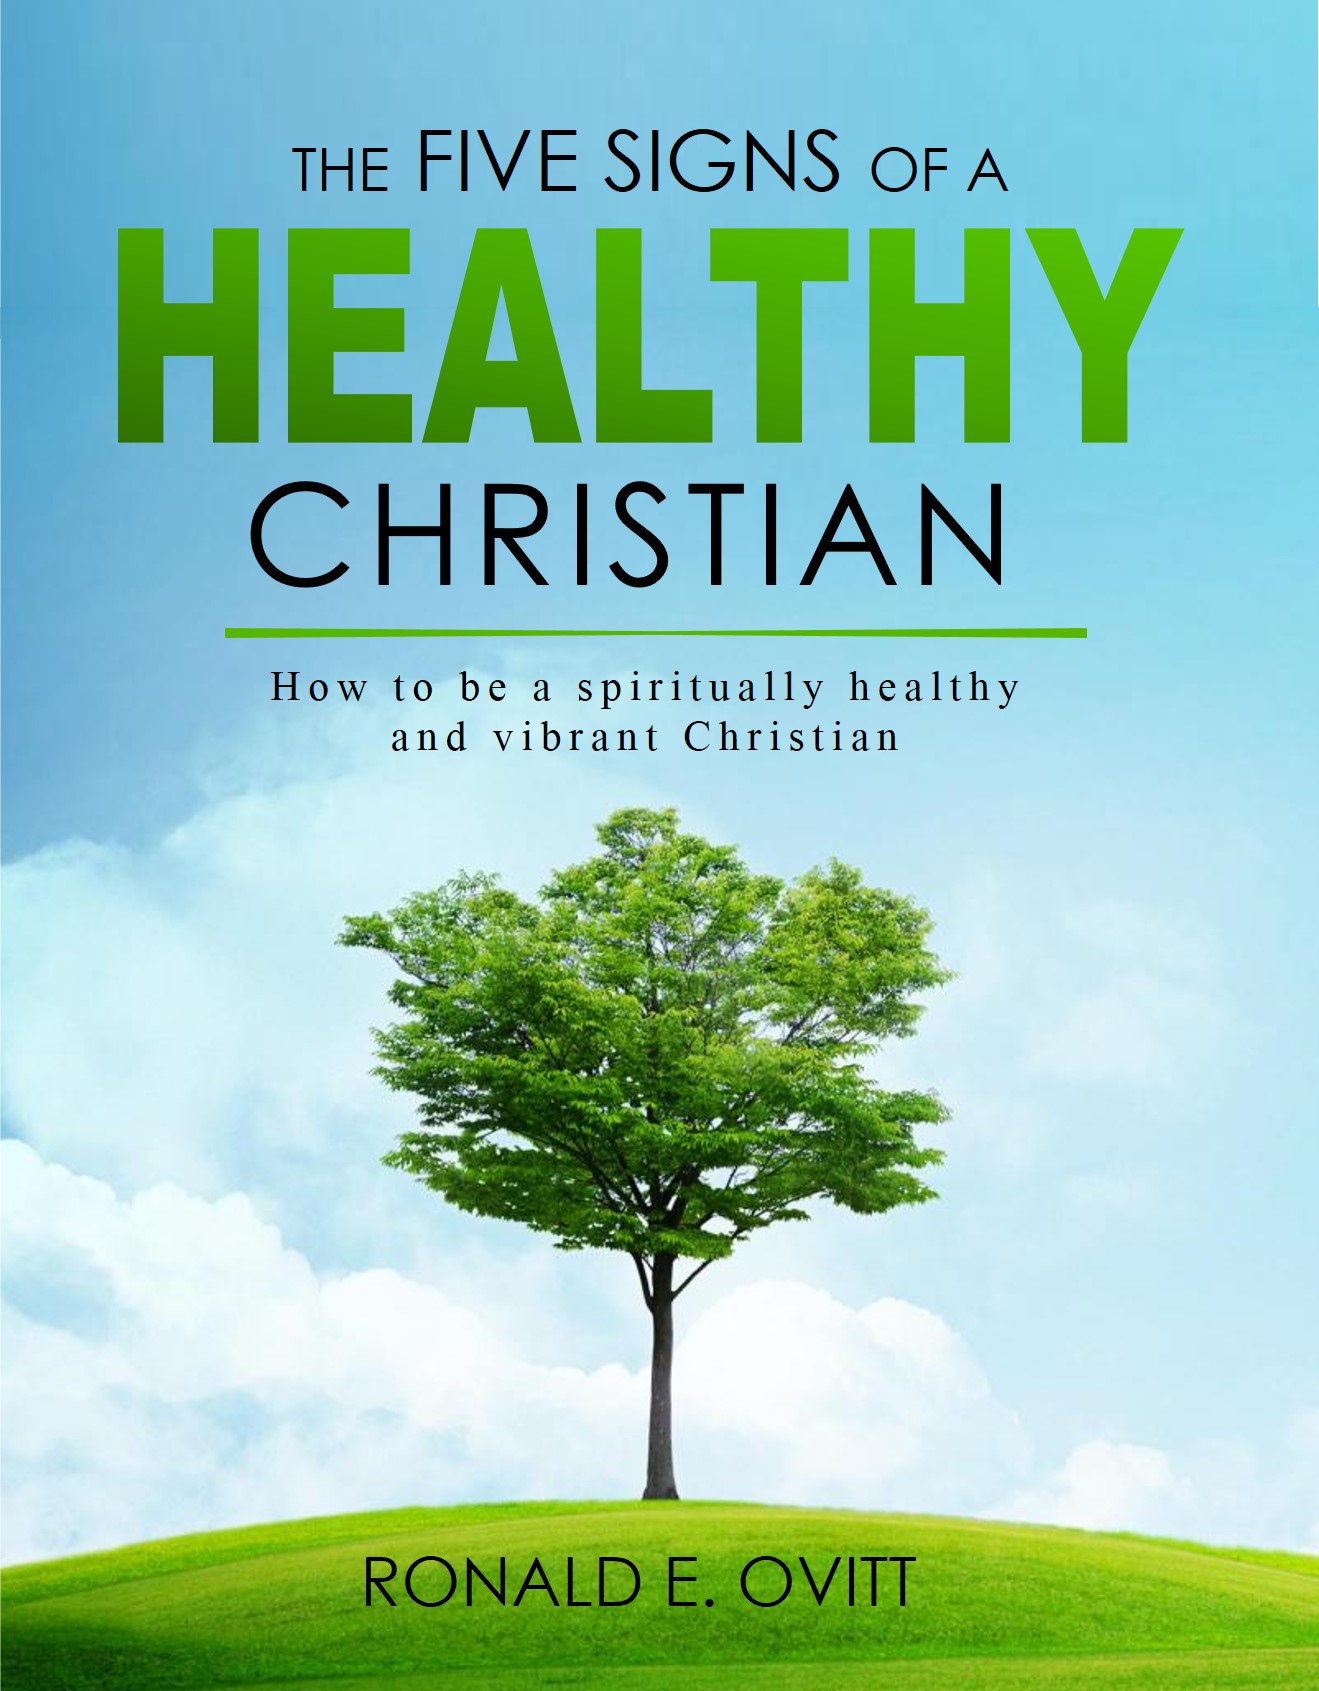 Cover of the "Five Signs of a Healthy Christian" book